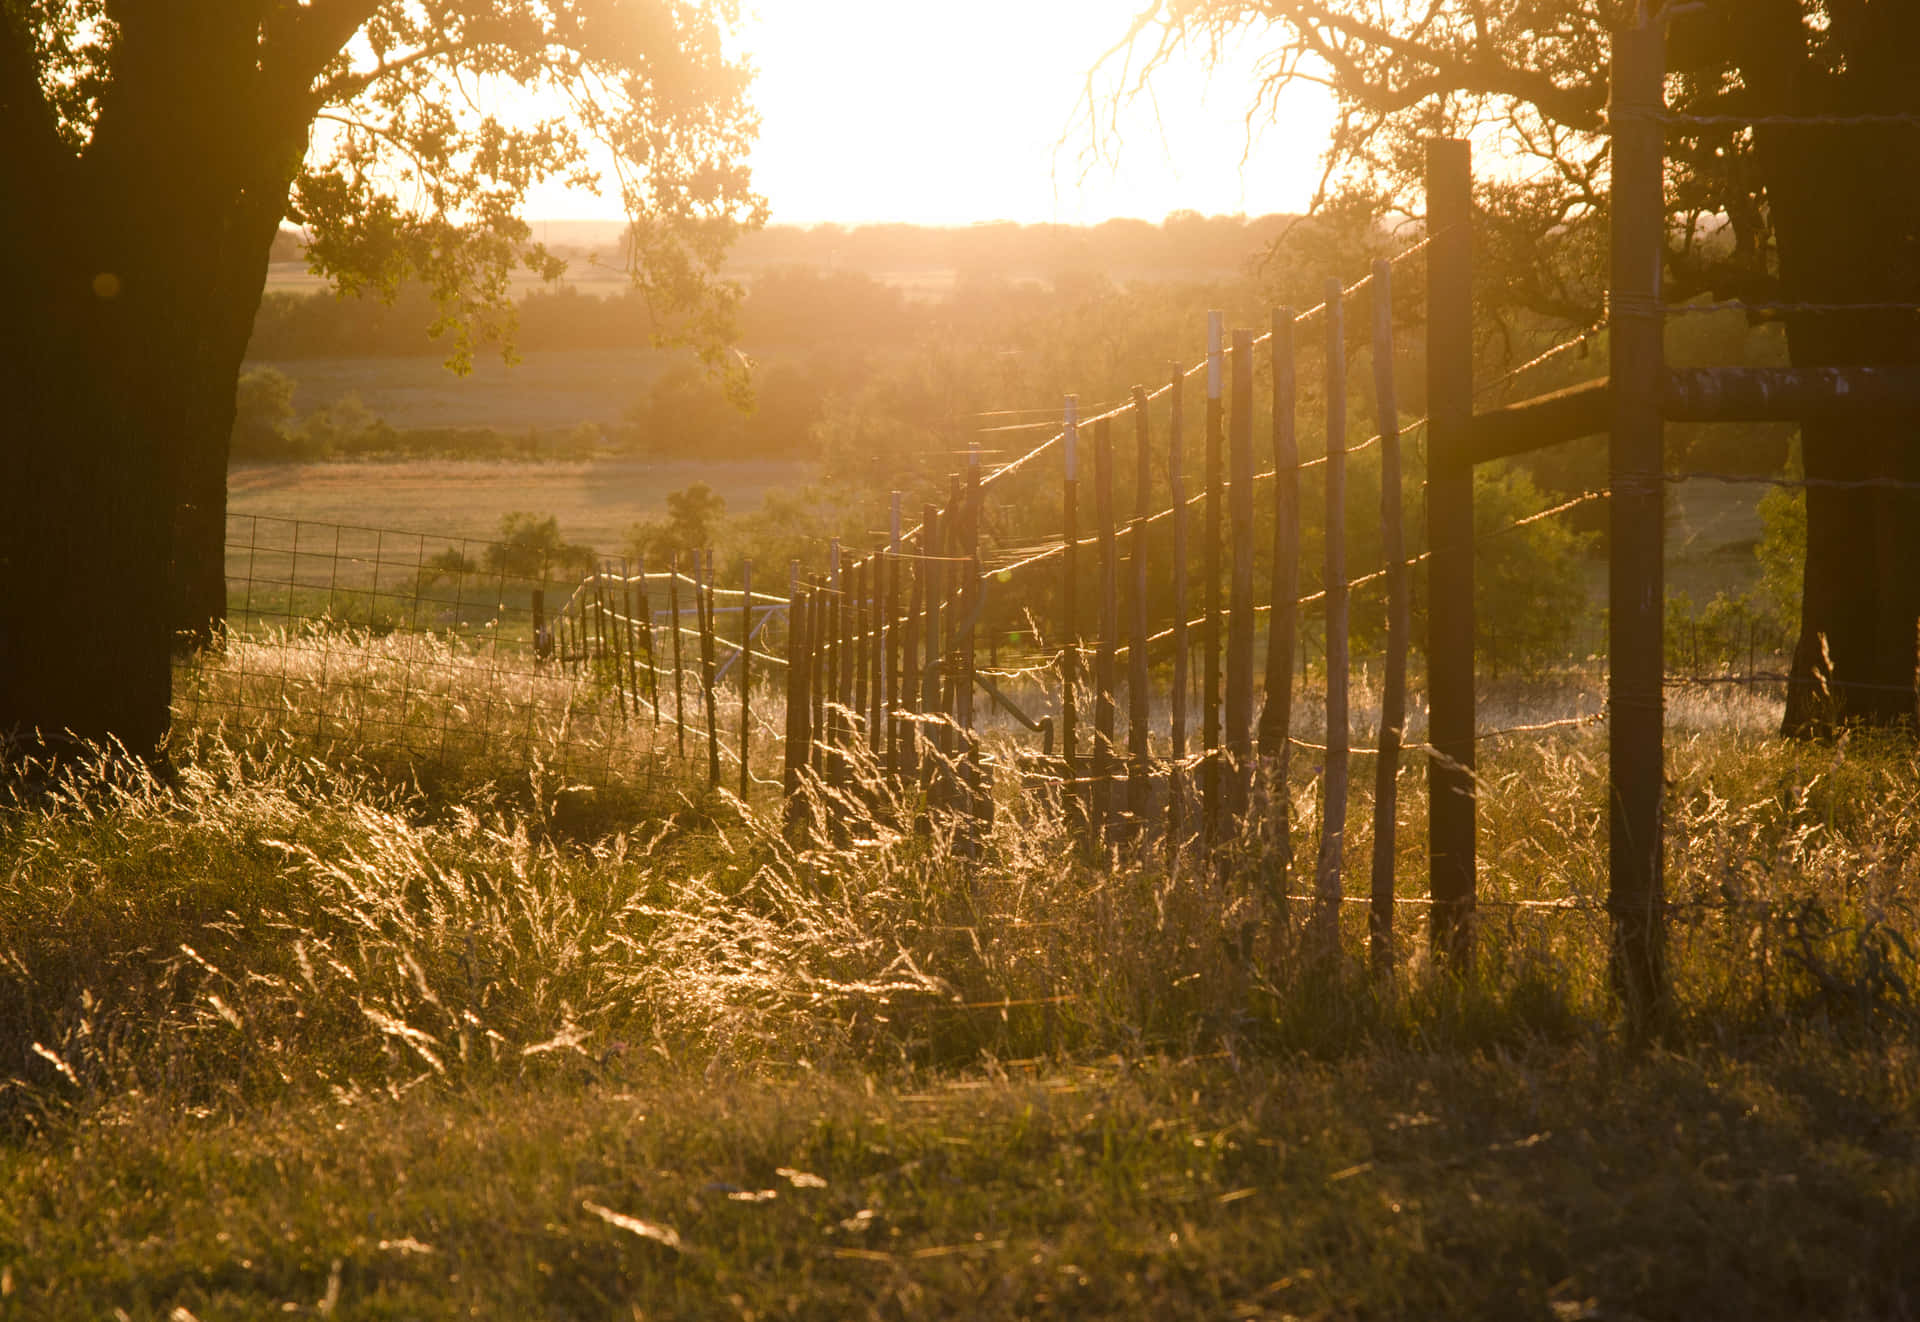 A Fence In The Field Wallpaper